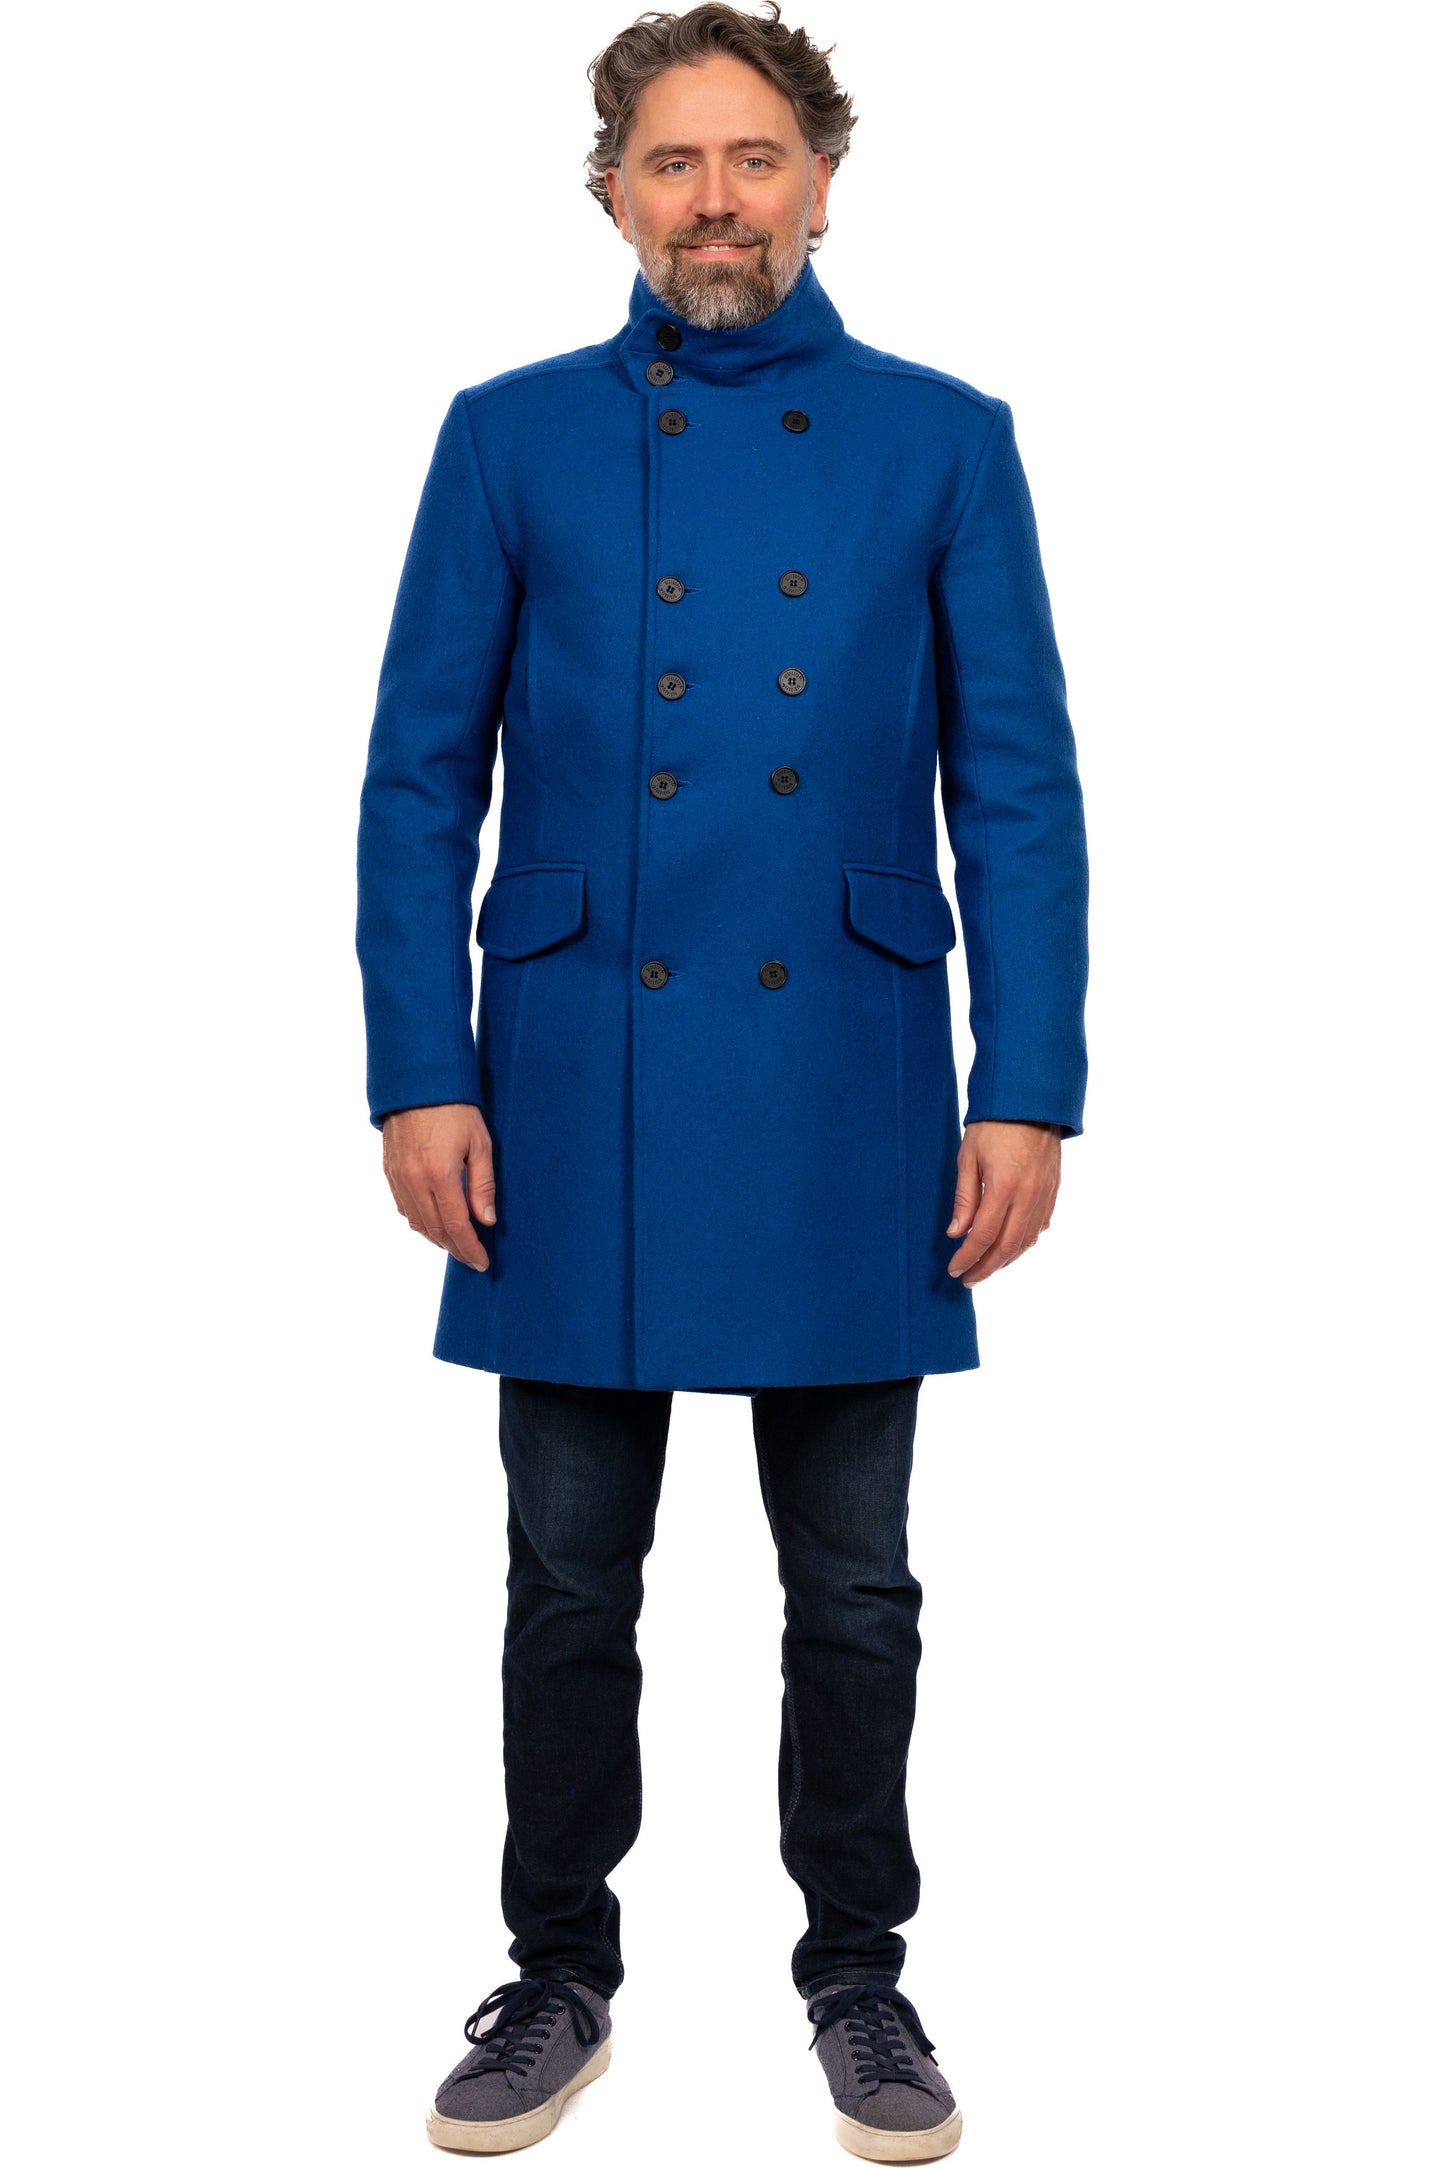 Desloups men's double-breasted winter coat in 100% wool and lined